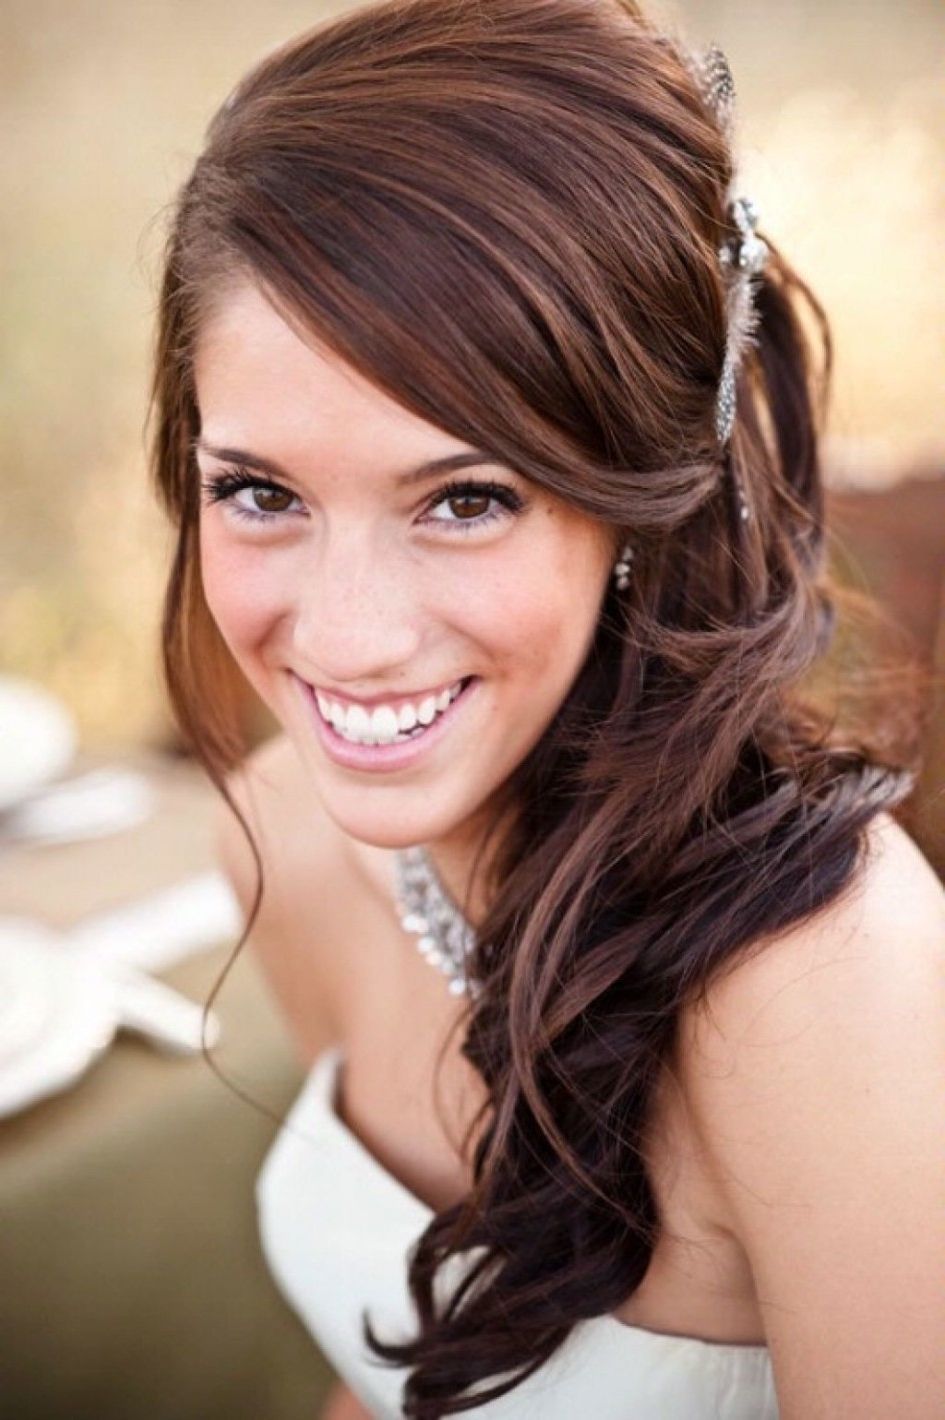 Wedding Hairstyles Ideas: Side Ponytail Curly Long Hair Casual Intended For Well Known Casual Wedding Hairstyles (View 13 of 15)